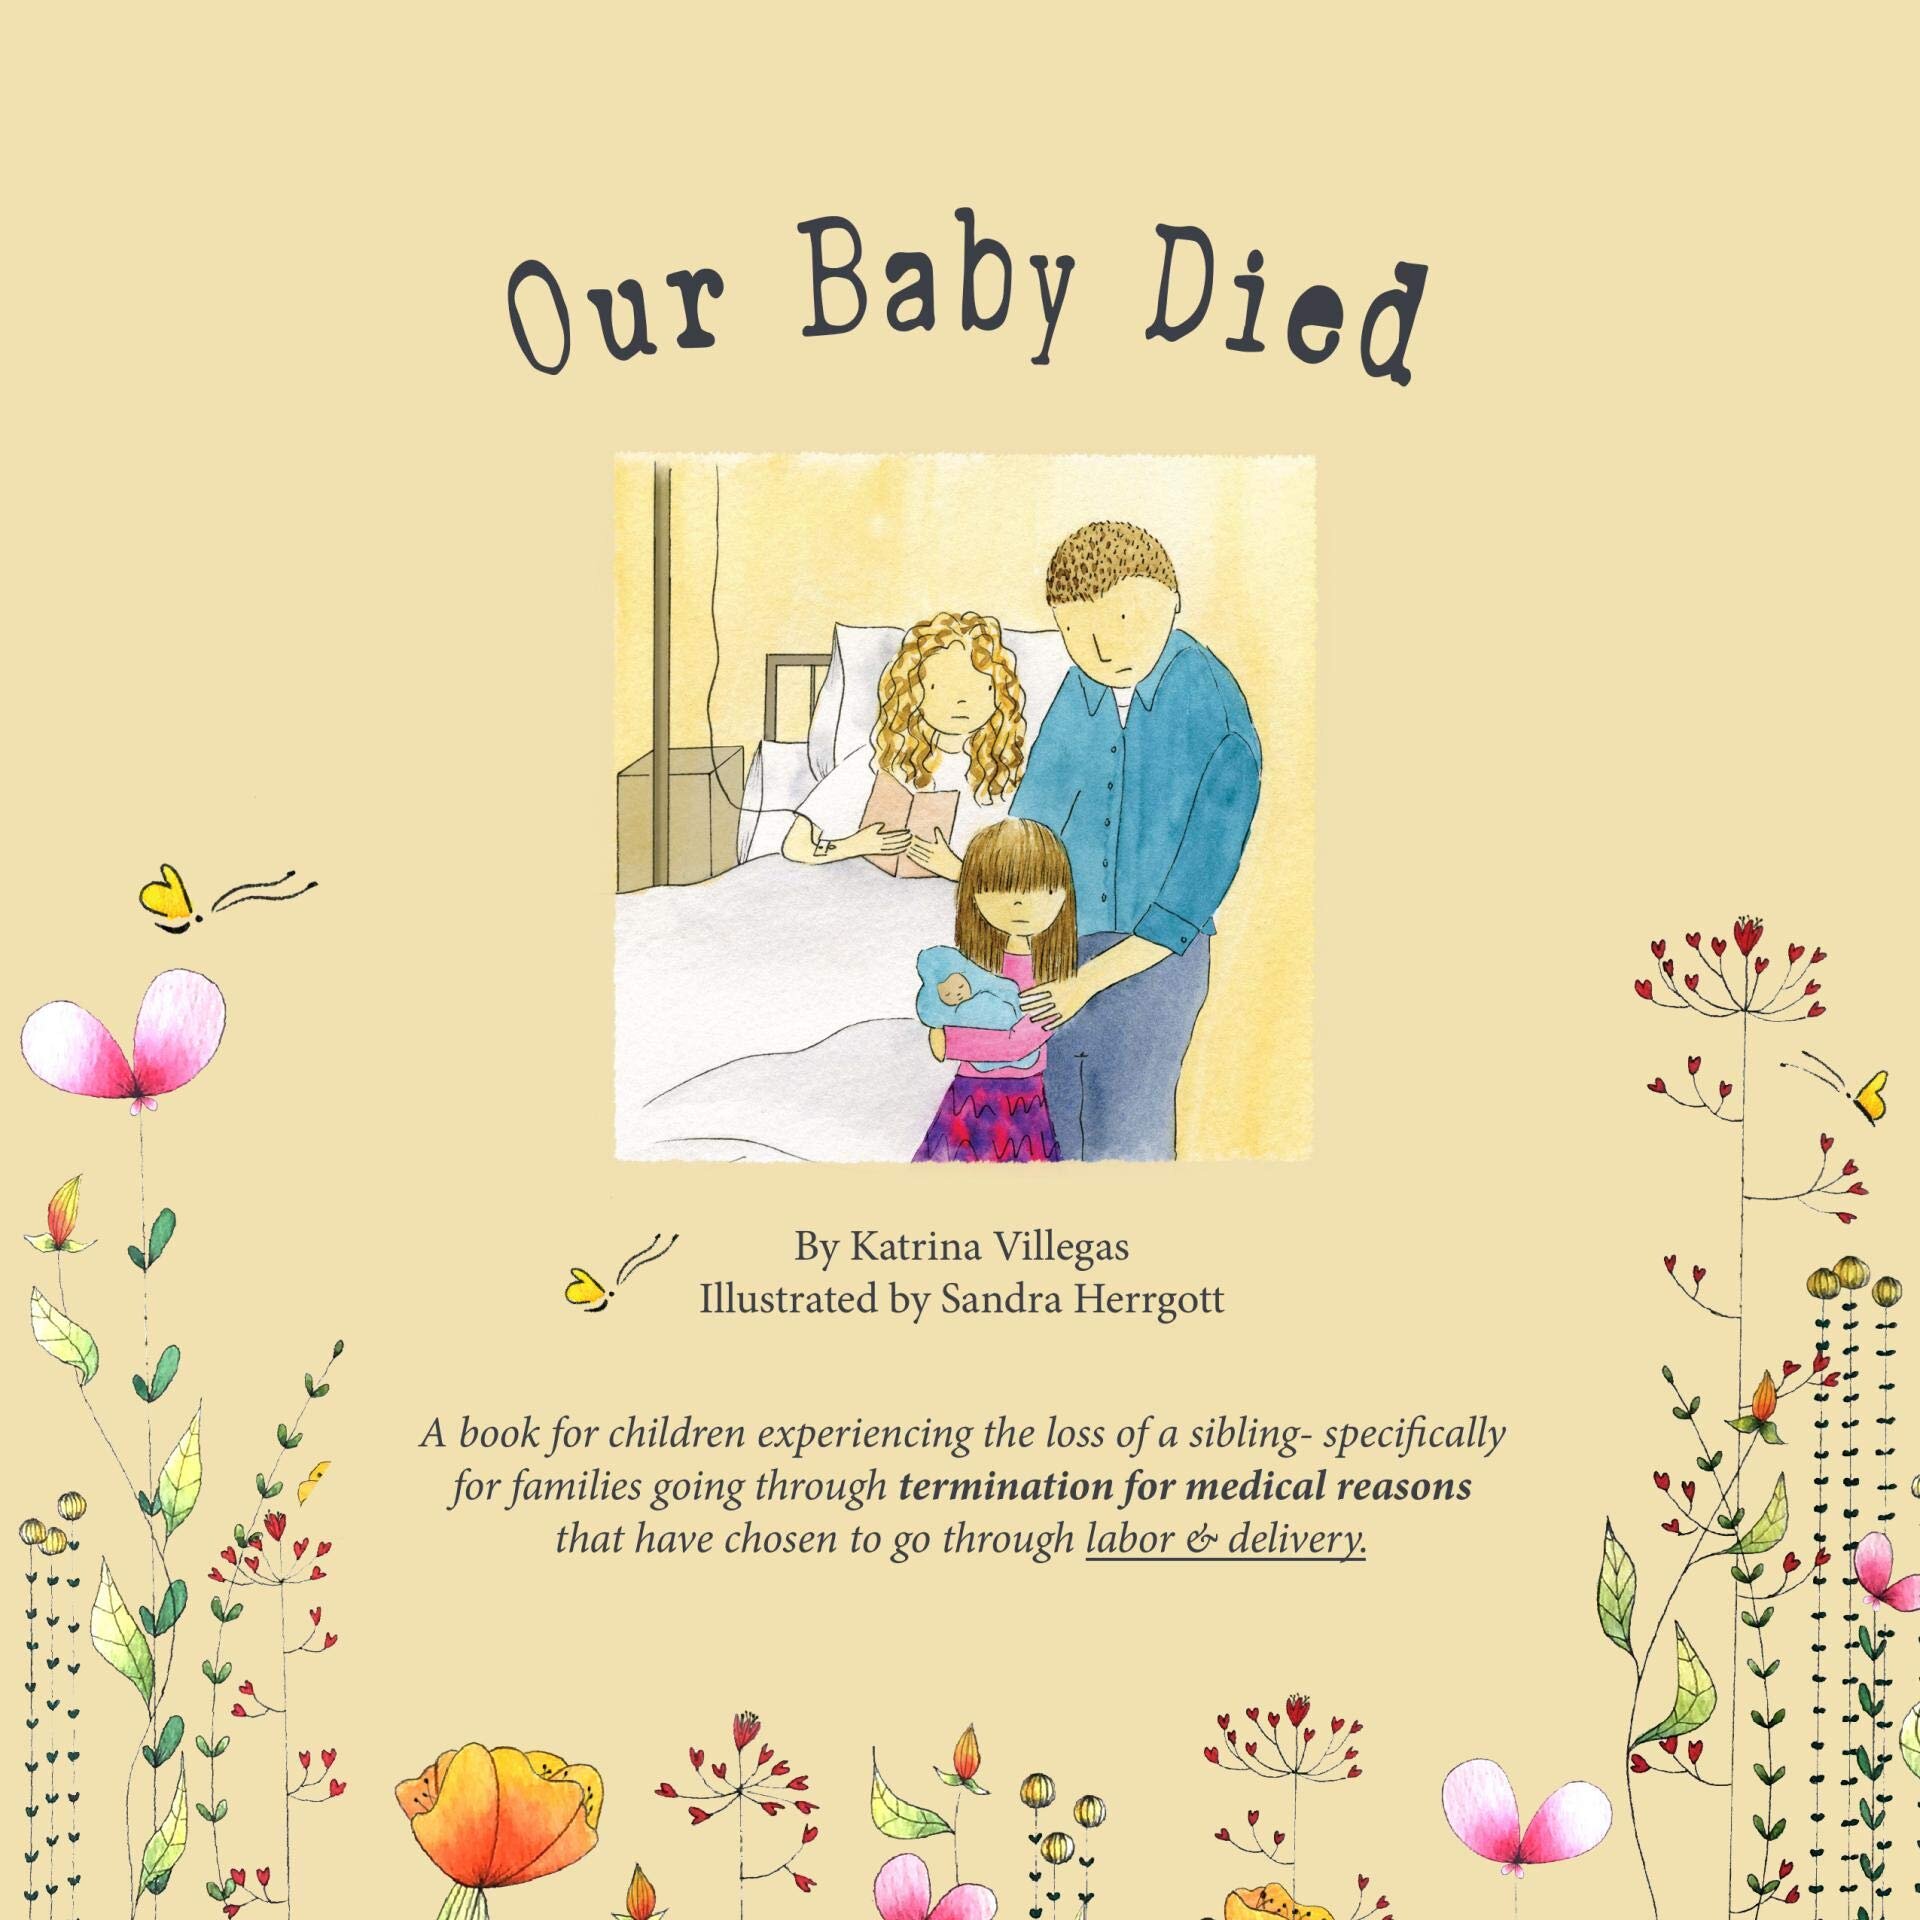 Our Baby Died: The road of grief during the death of a sibling. Coping with the loss and understanding death.  (Copy) (Copy)